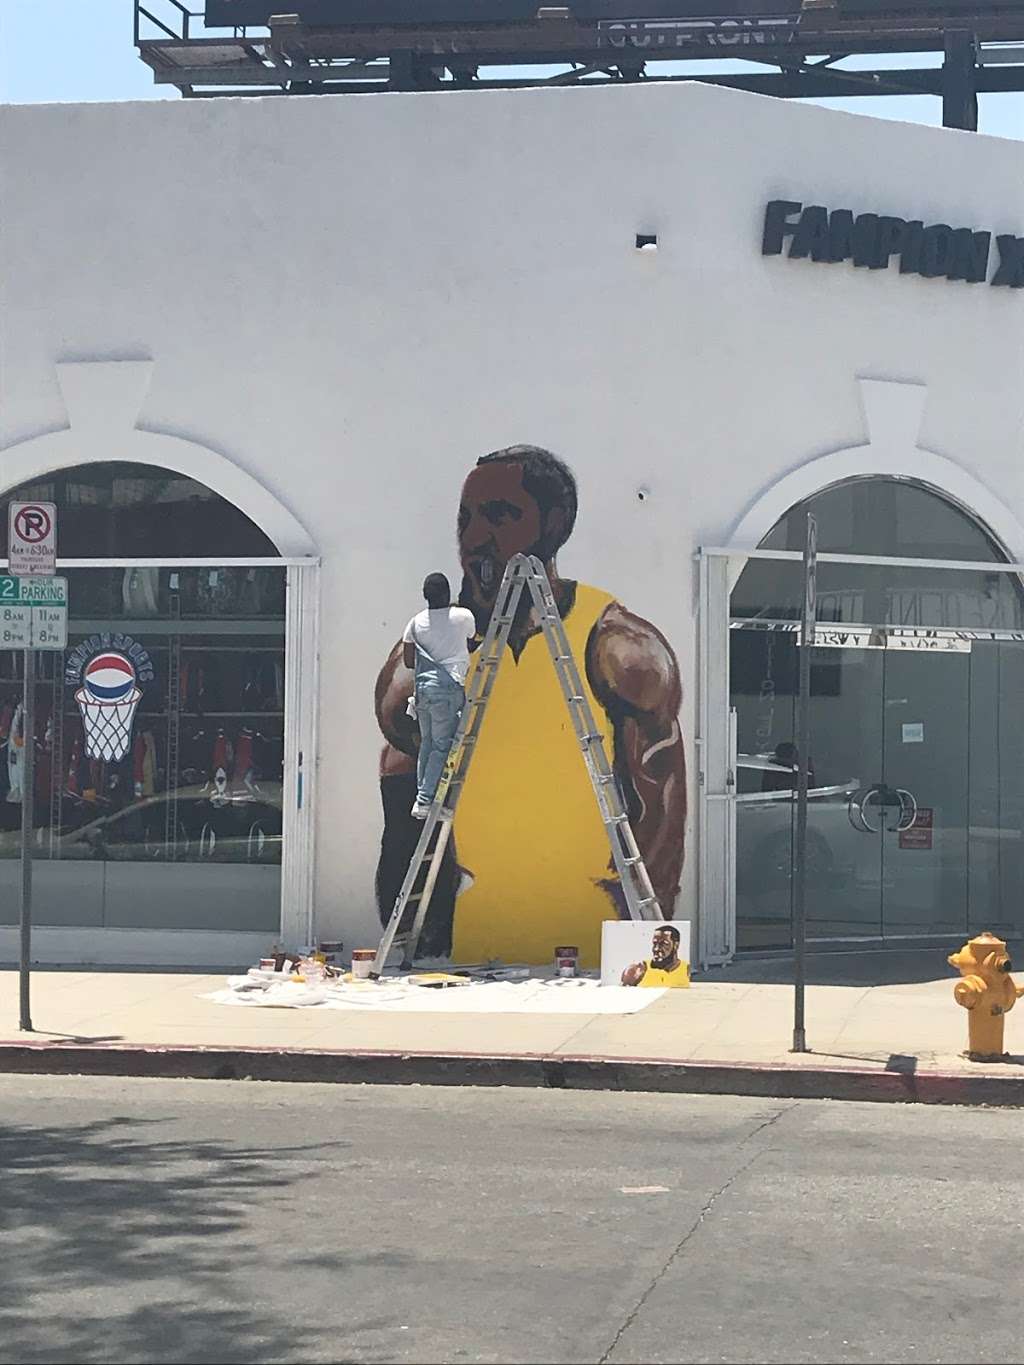 Fampion X | 7450 Melrose Ave, Los Angeles, CA 90046, USA